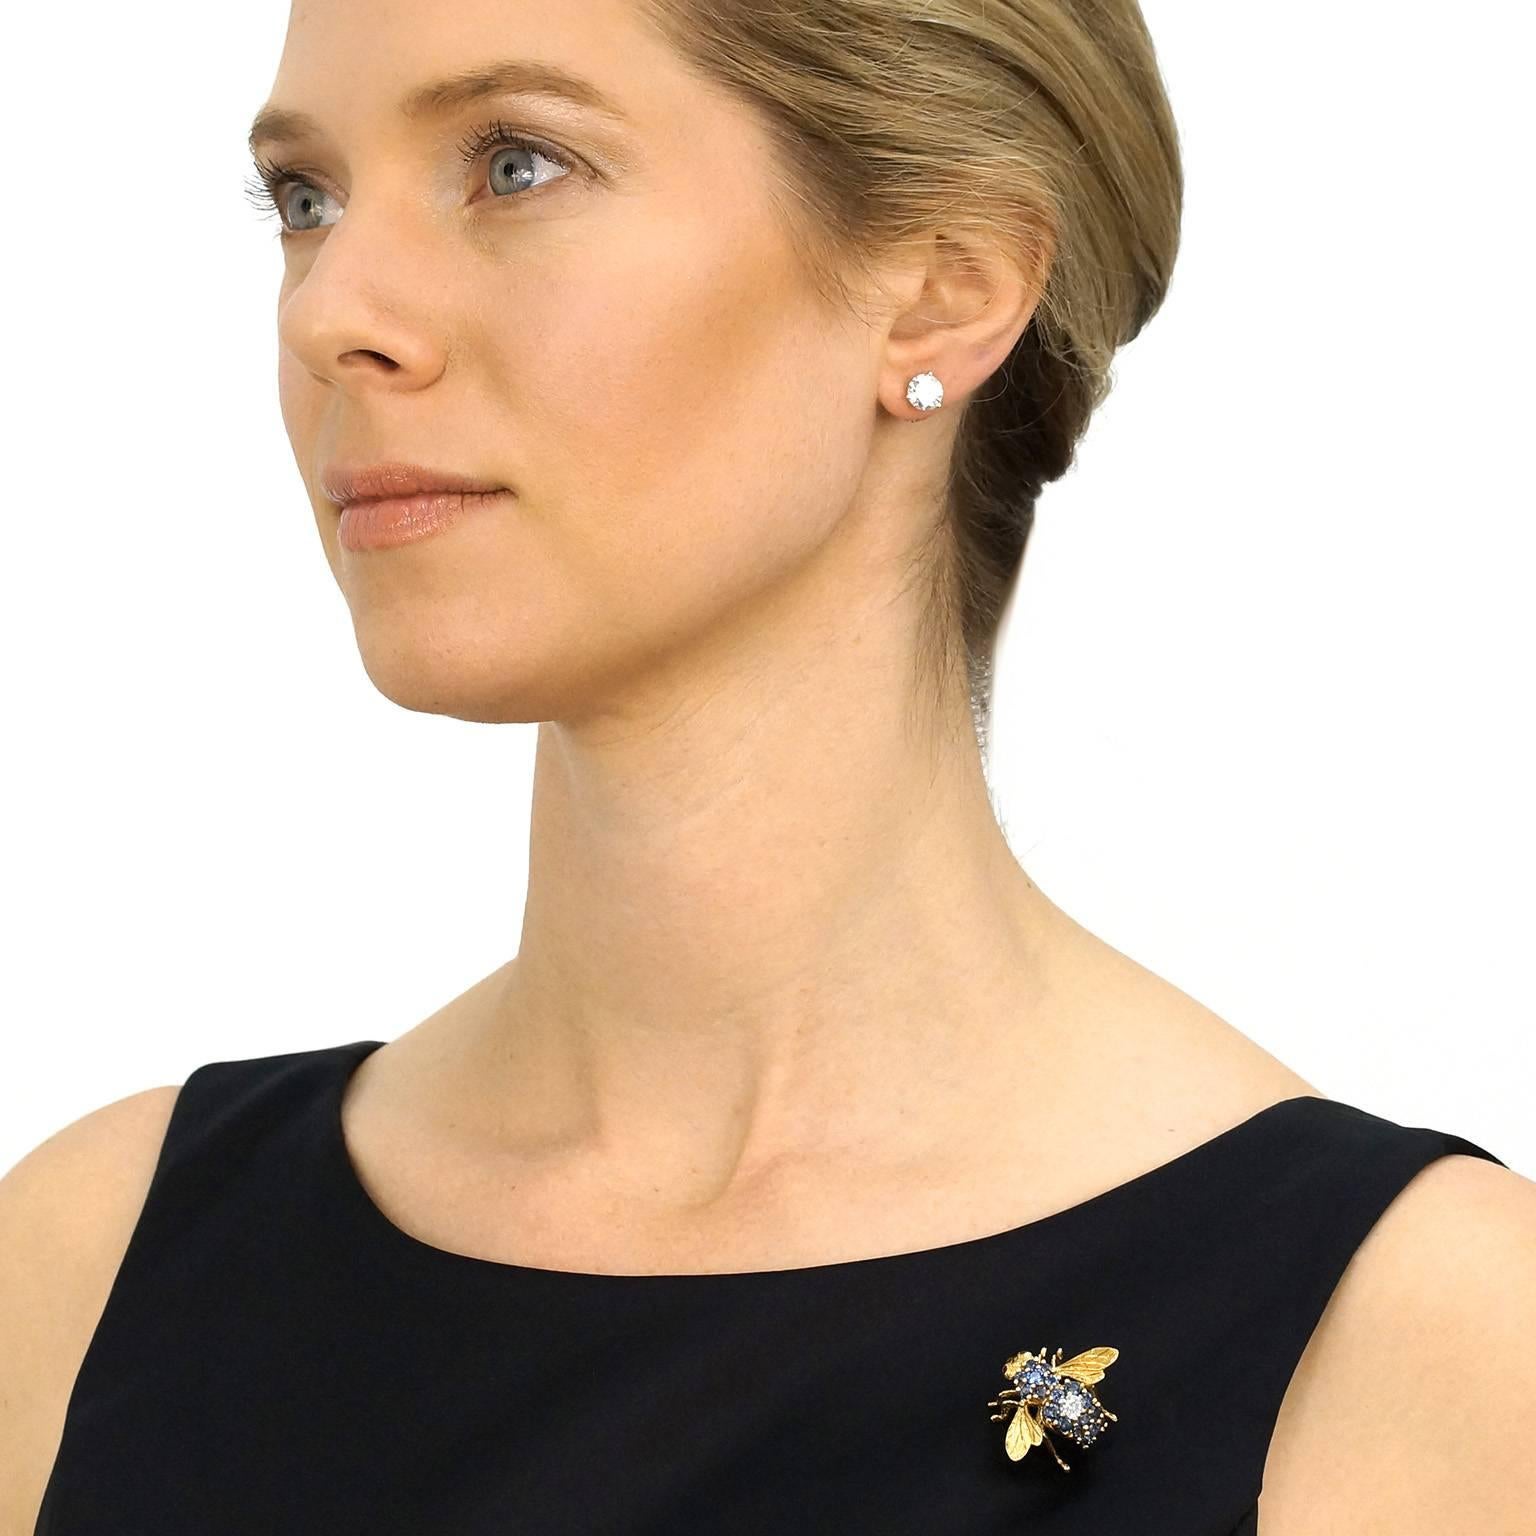 Circa 1970s, 18k, Herbert Rosenthal, New York City.  This charming bee pin by Herbert Rosenthal is set with 2.50 carats of brilliant white diamonds (F color, VS clarity). Rosenthal Bees are the chic culmination of a centuries-long fascination with